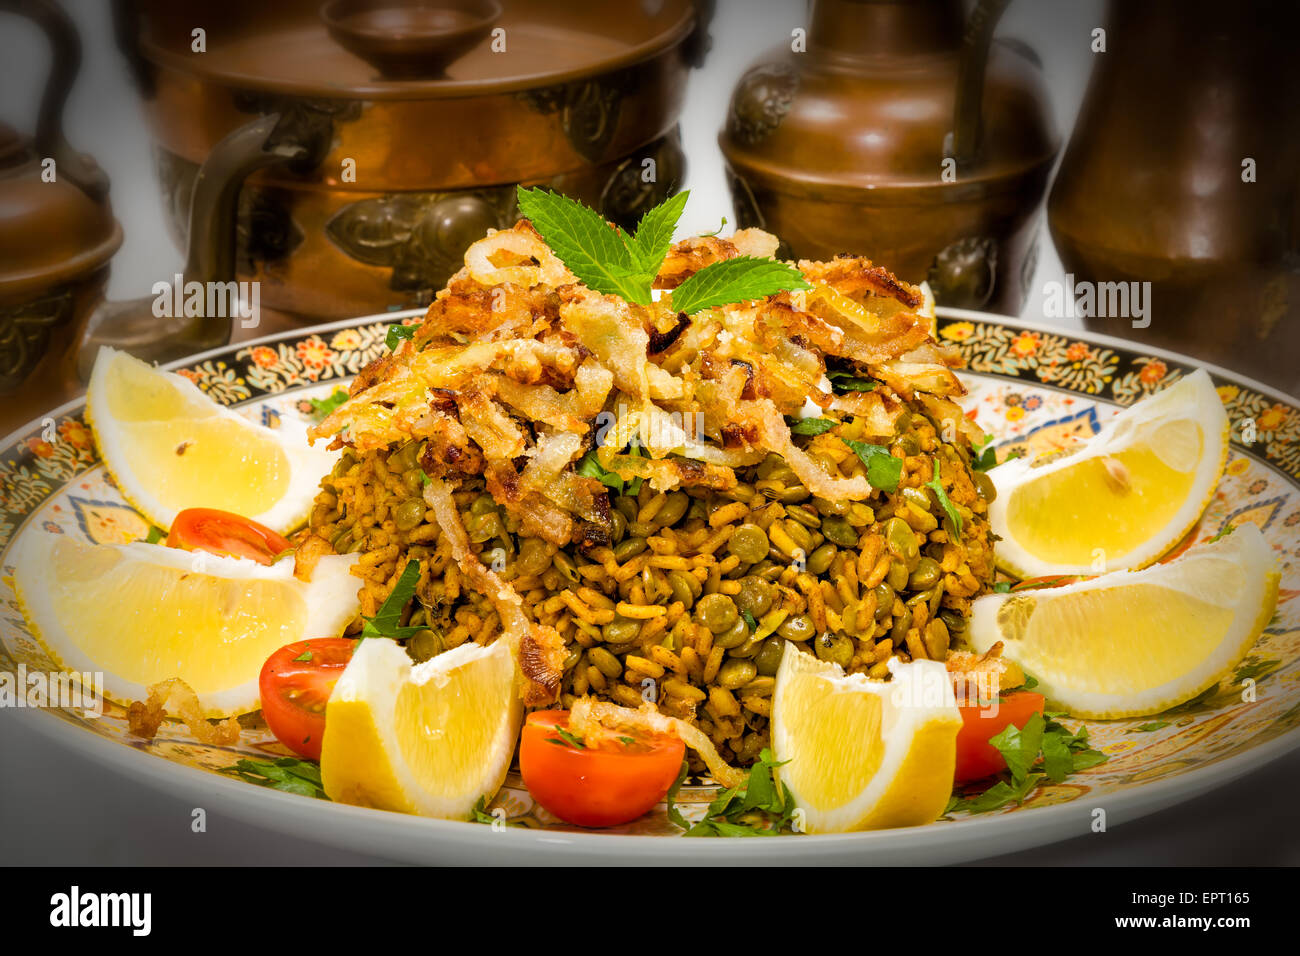 Mejadra - traditional Arabic dish of rice and lentils Stock Photo